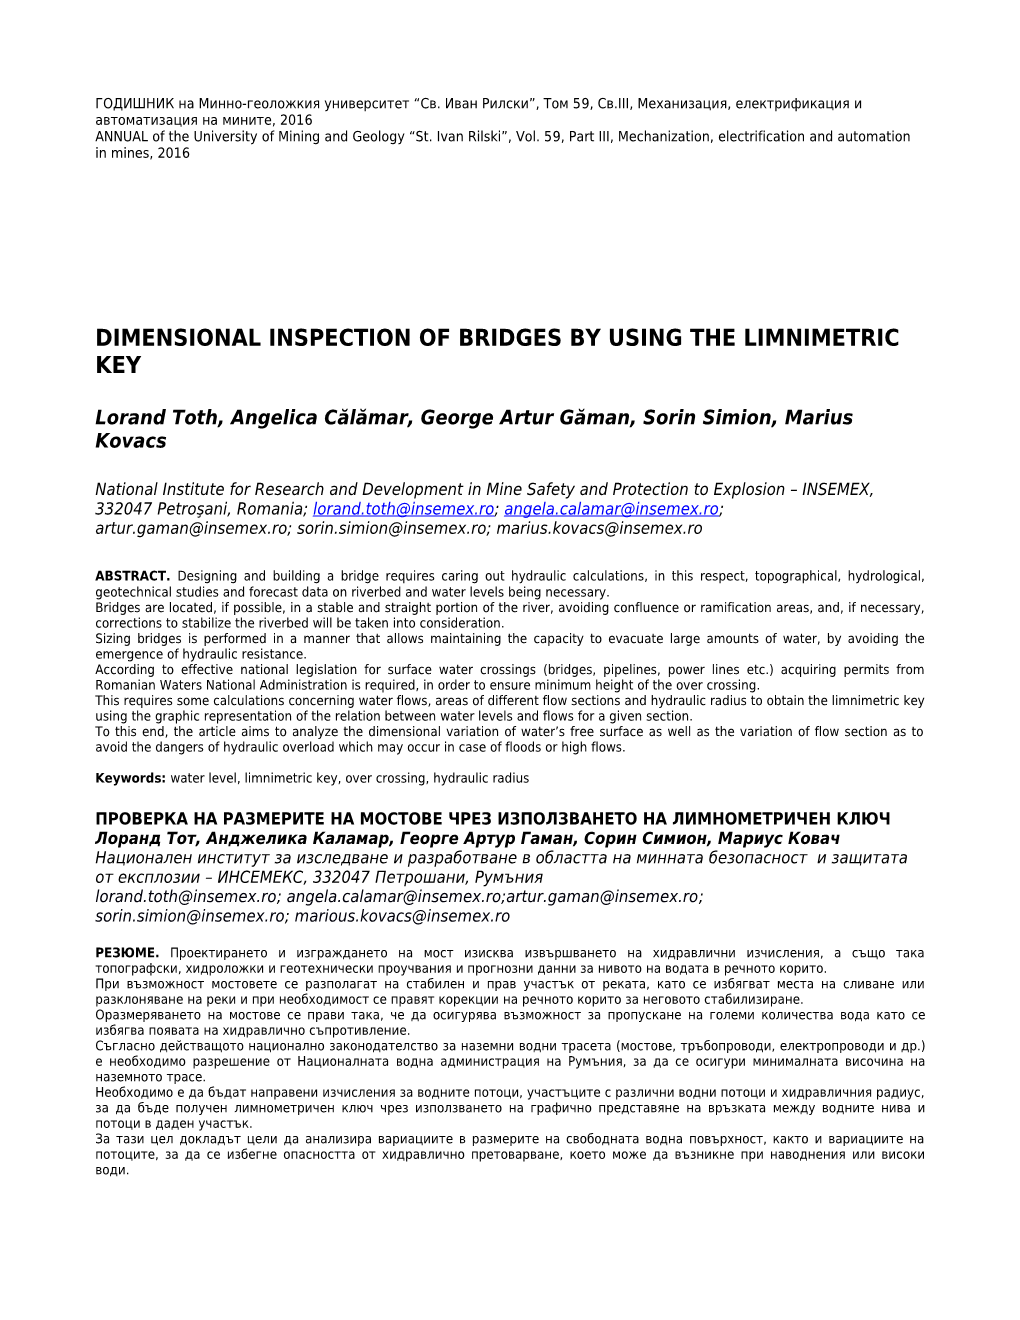 Dimensional Inspection of Bridges by Using the Limnimetric Key